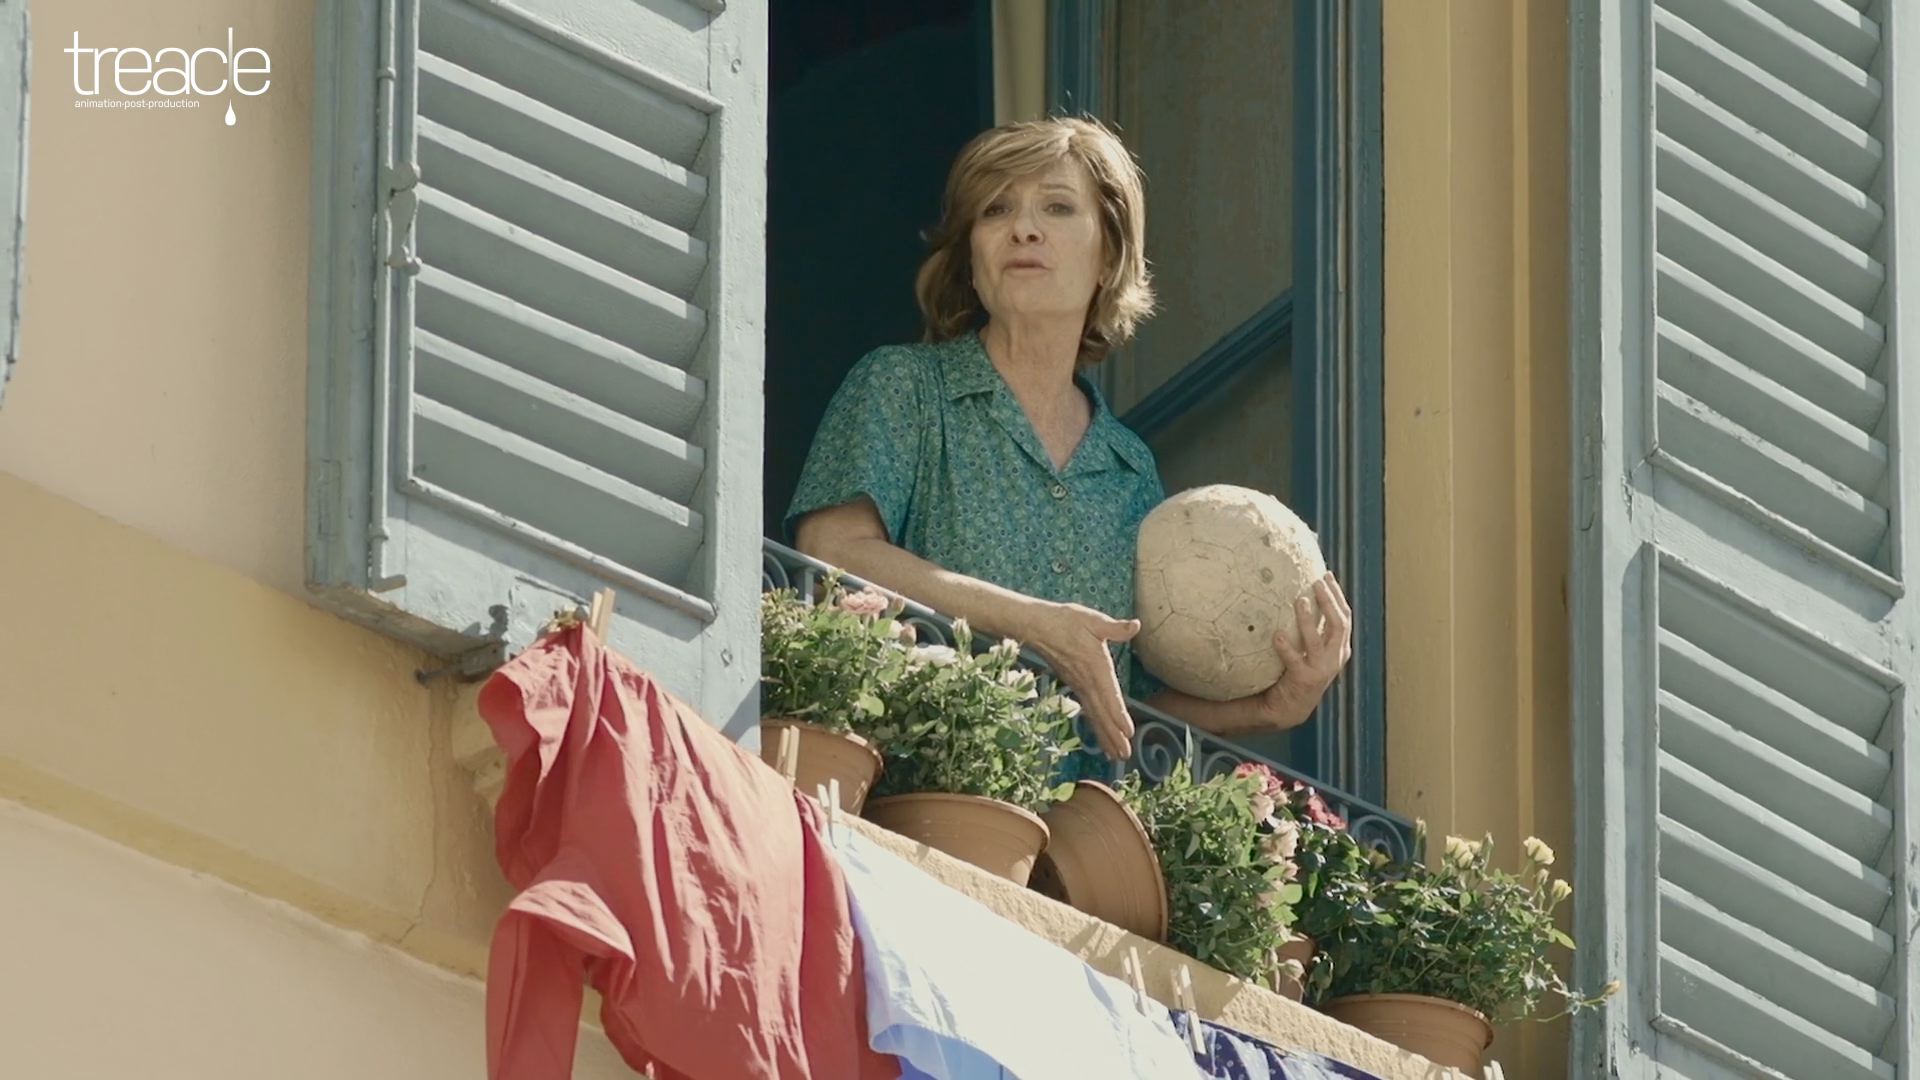 An Italian woman holding a football standing at her window